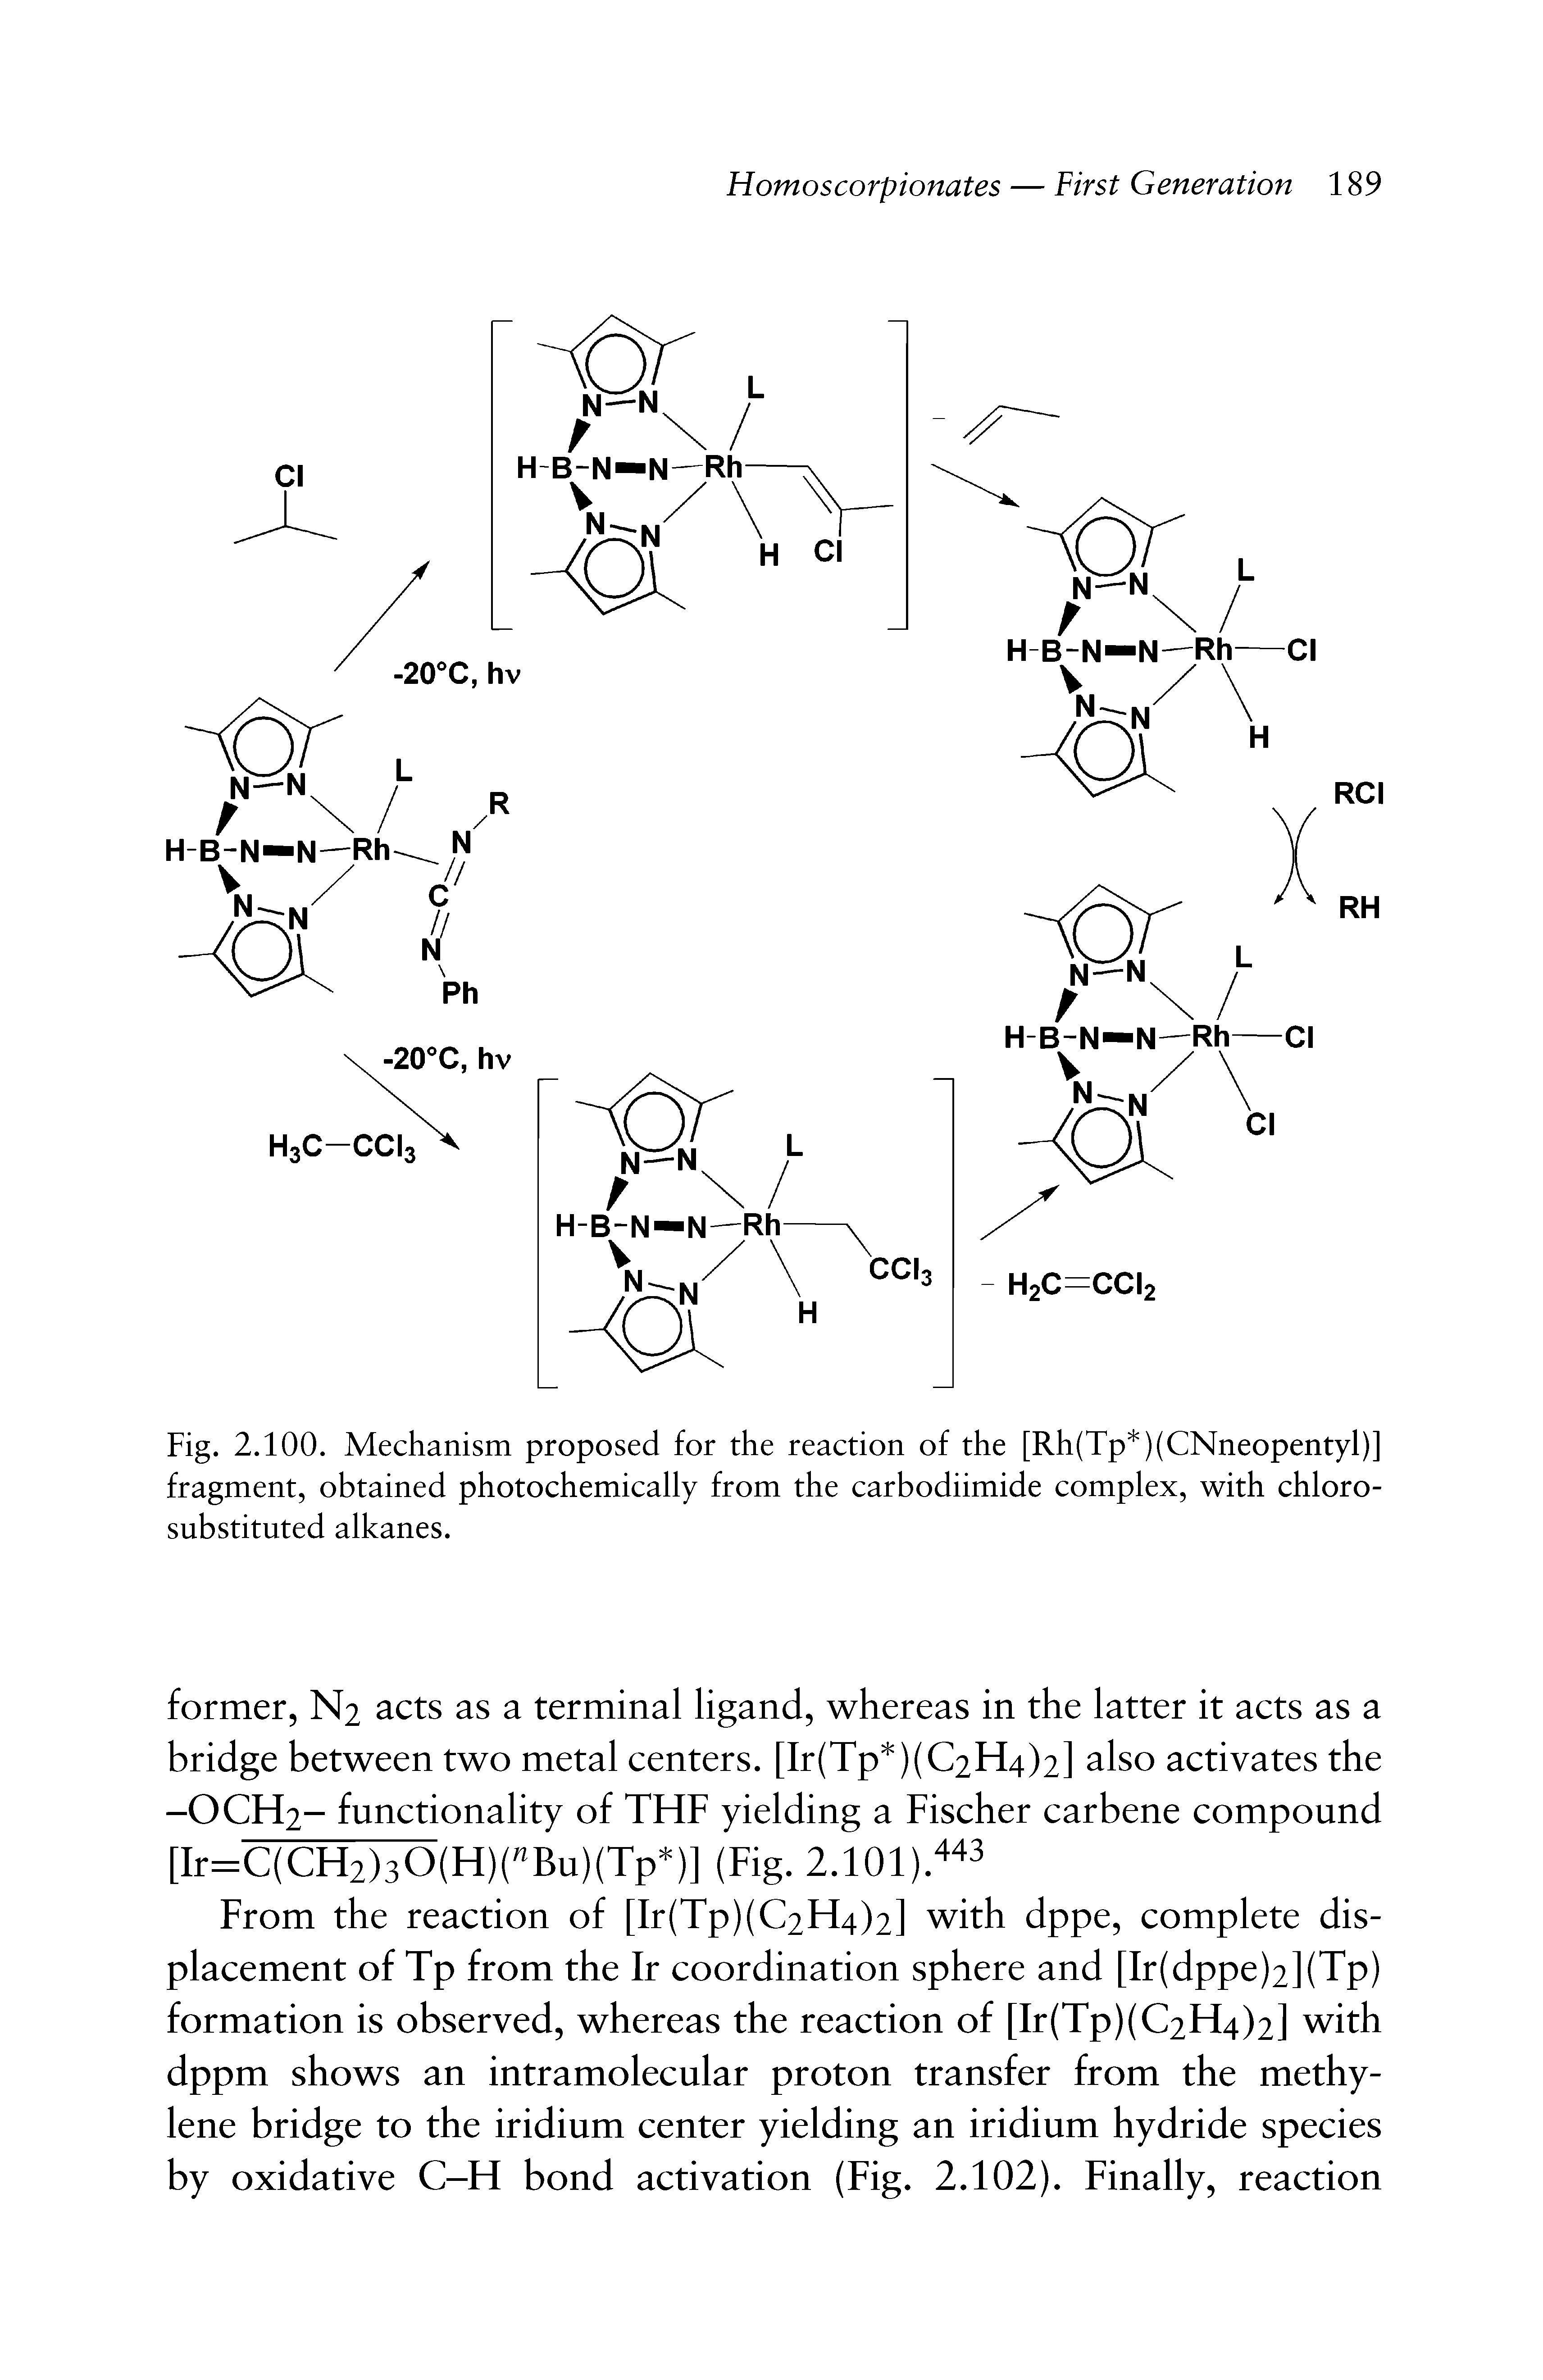 Fig. 2.100. Mechanism proposed for the reaction of the [Rh(Tp )(CNneopentyl)] fragment, obtained photochemically from the carbodiimide complex, with chloro-substituted alkanes.